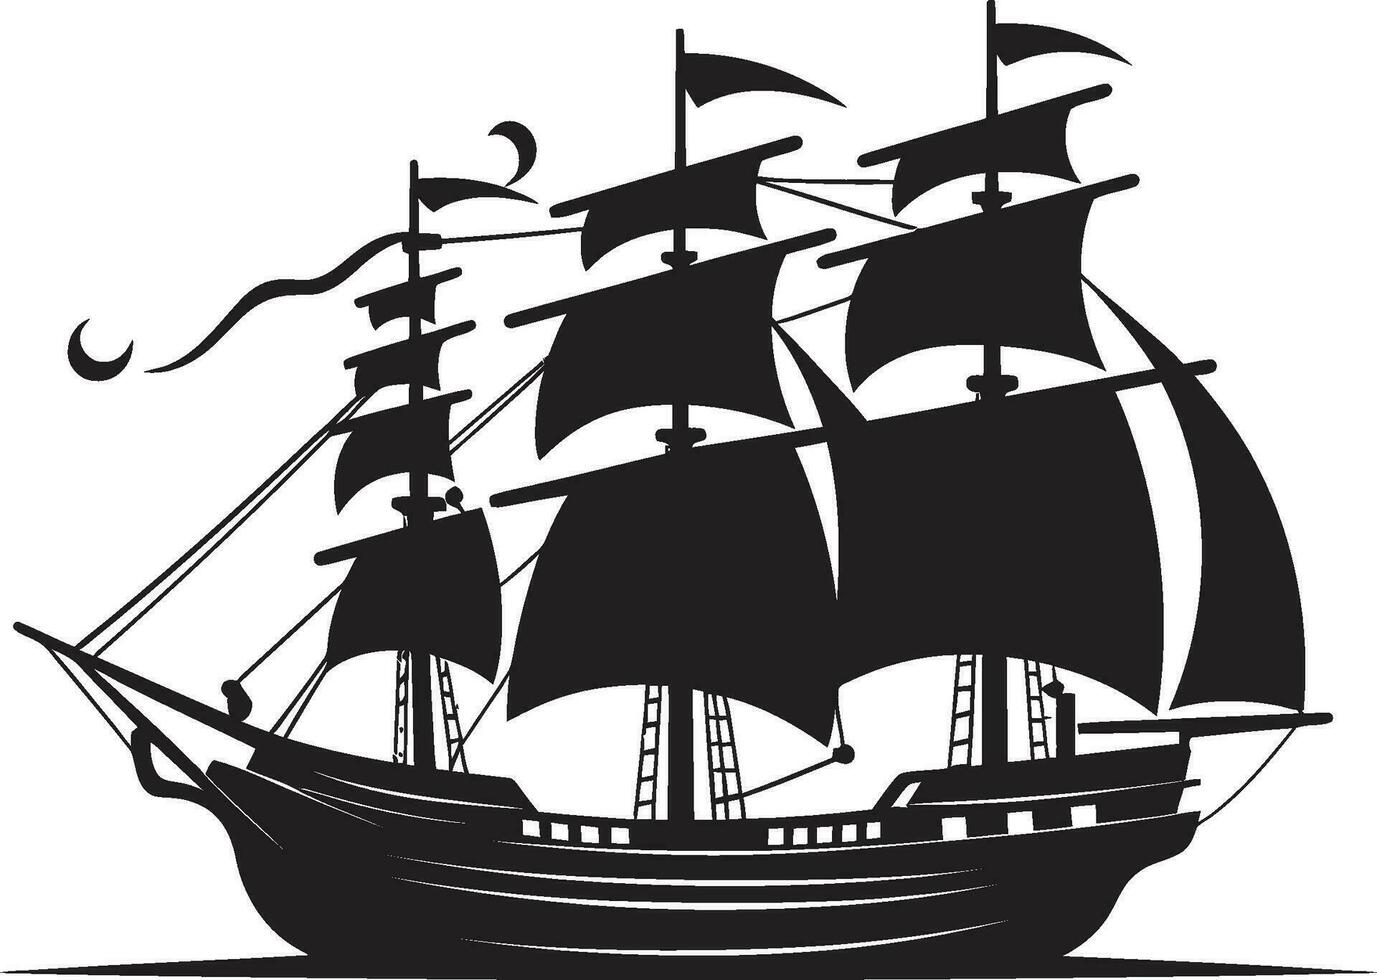 Weathered Seafarer Vector Ancient Ship Timeless Mariners Black Ship Vector Icon